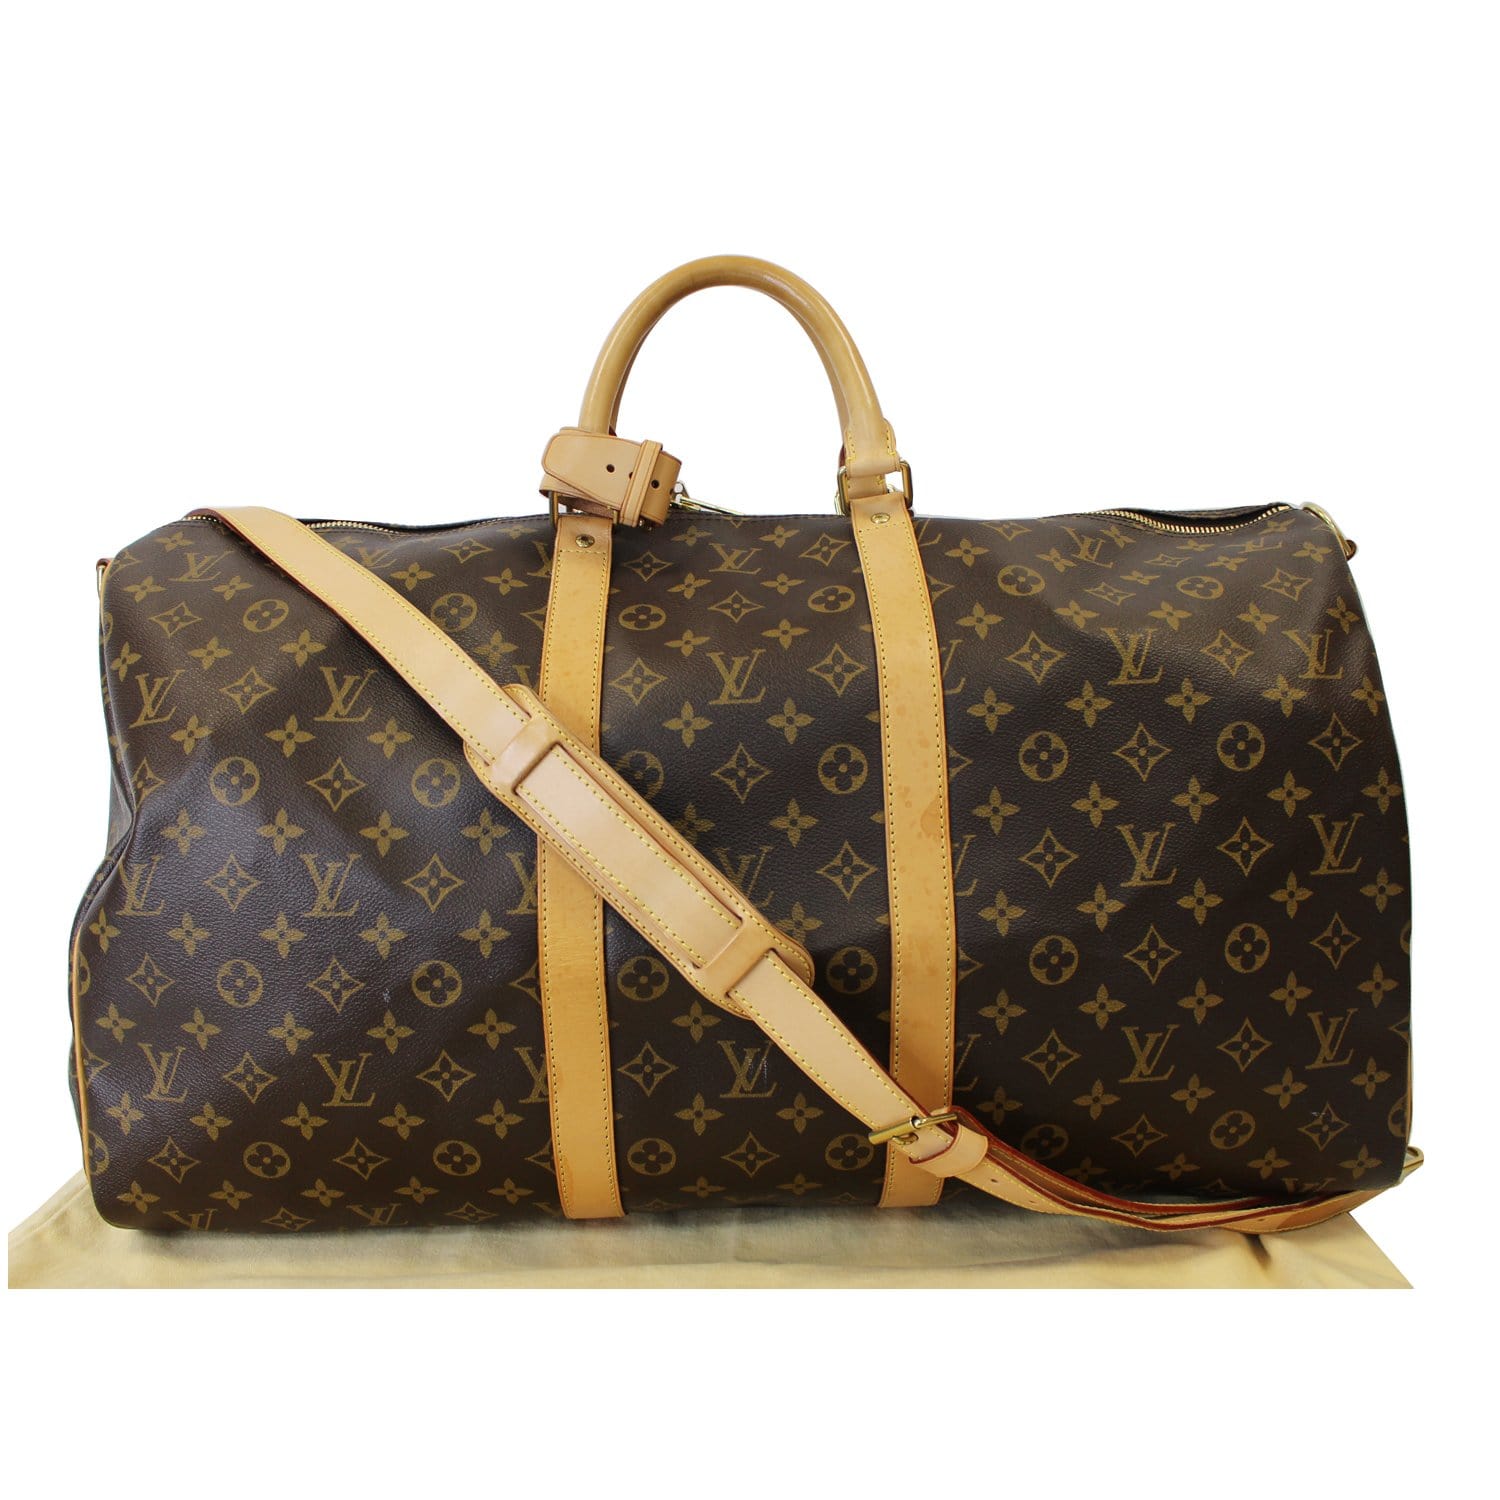 Louis Vuitton Keepall Bandouliere Bag Monogram Canvas with